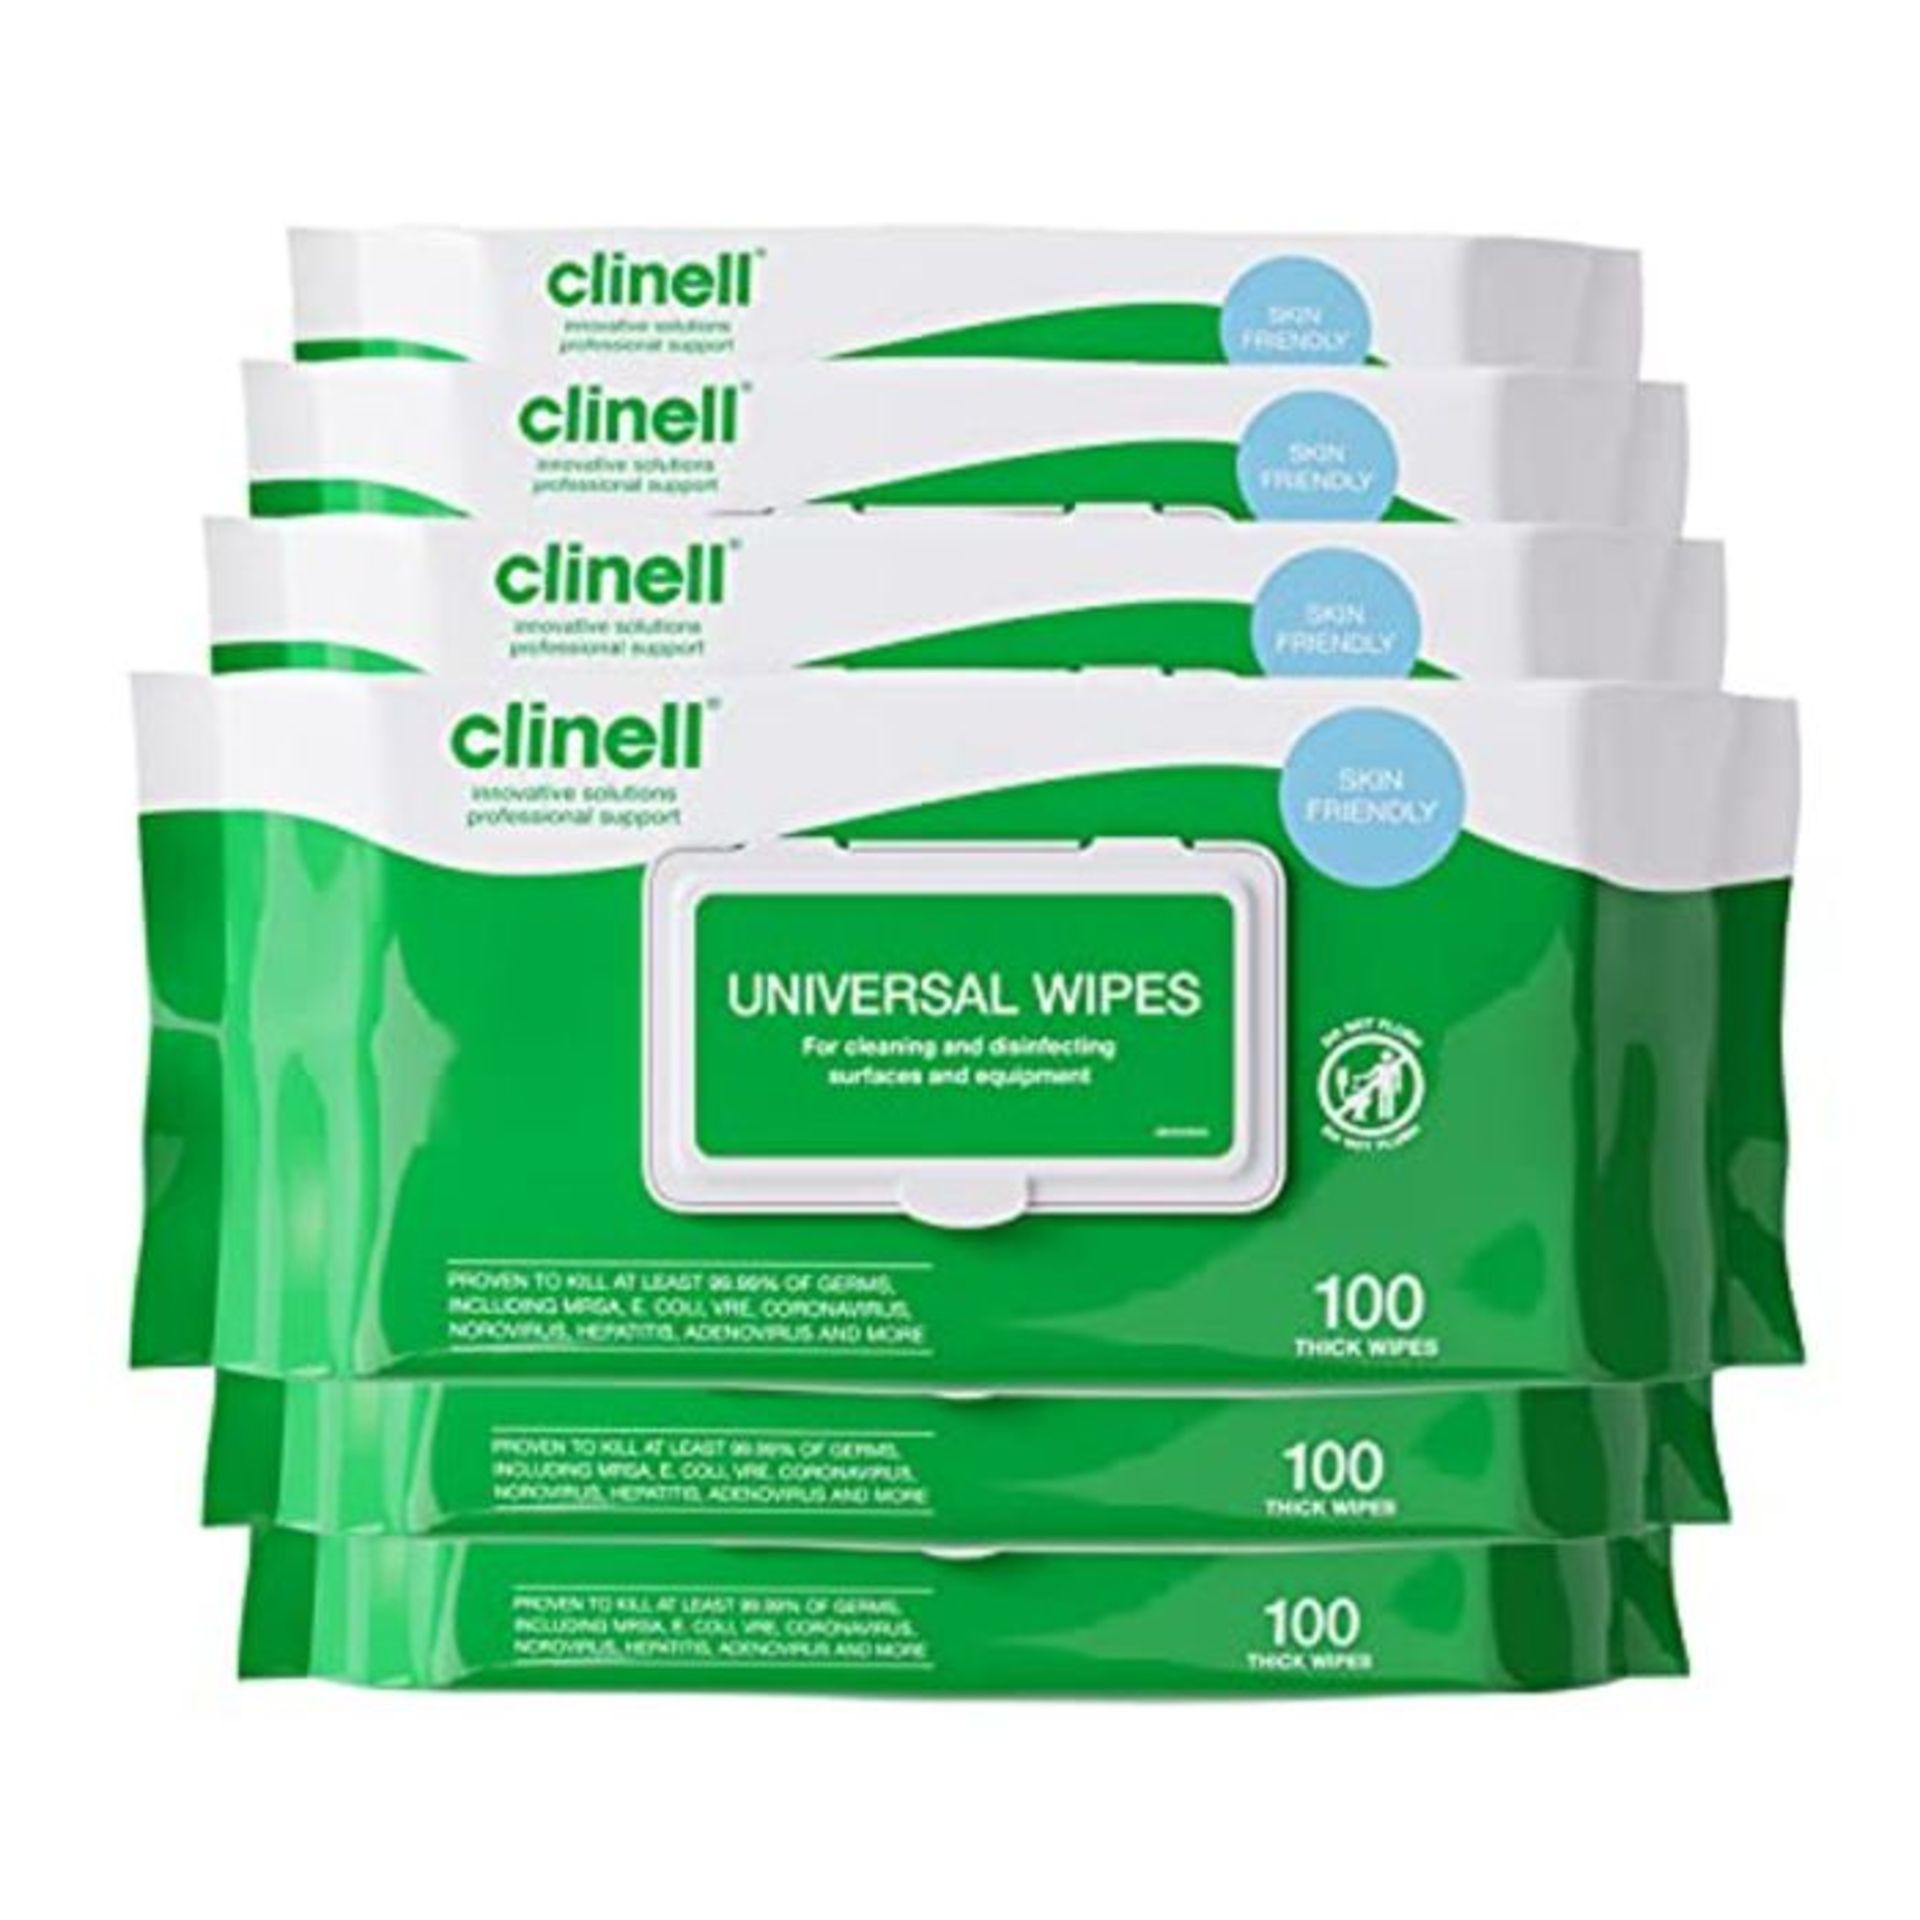 Clinell Universal Cleaning and Disinfectant Wipes for Surfaces - 6 Pack of 100 Extra T